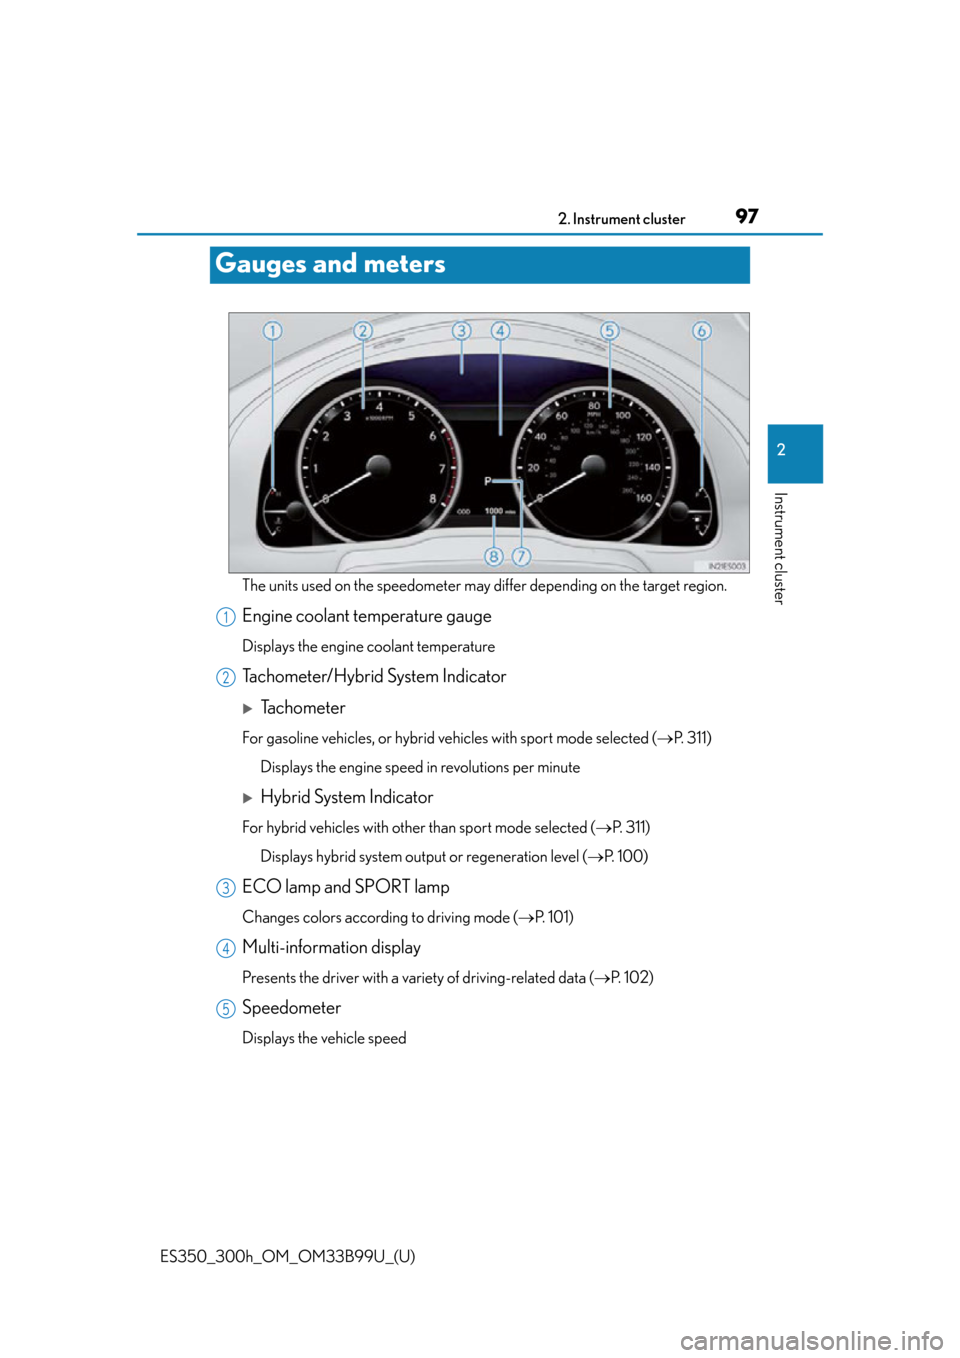 Lexus ES300h 2015  Specifications / Owners Manual (OM33B99U) 97
ES350_300h_OM_OM33B99U_(U)
2. Instrument cluster
2
Instrument cluster
Gauges and meters
The units used on the speedometer may differ depending on the target region.
Engine coolant temperature gauge